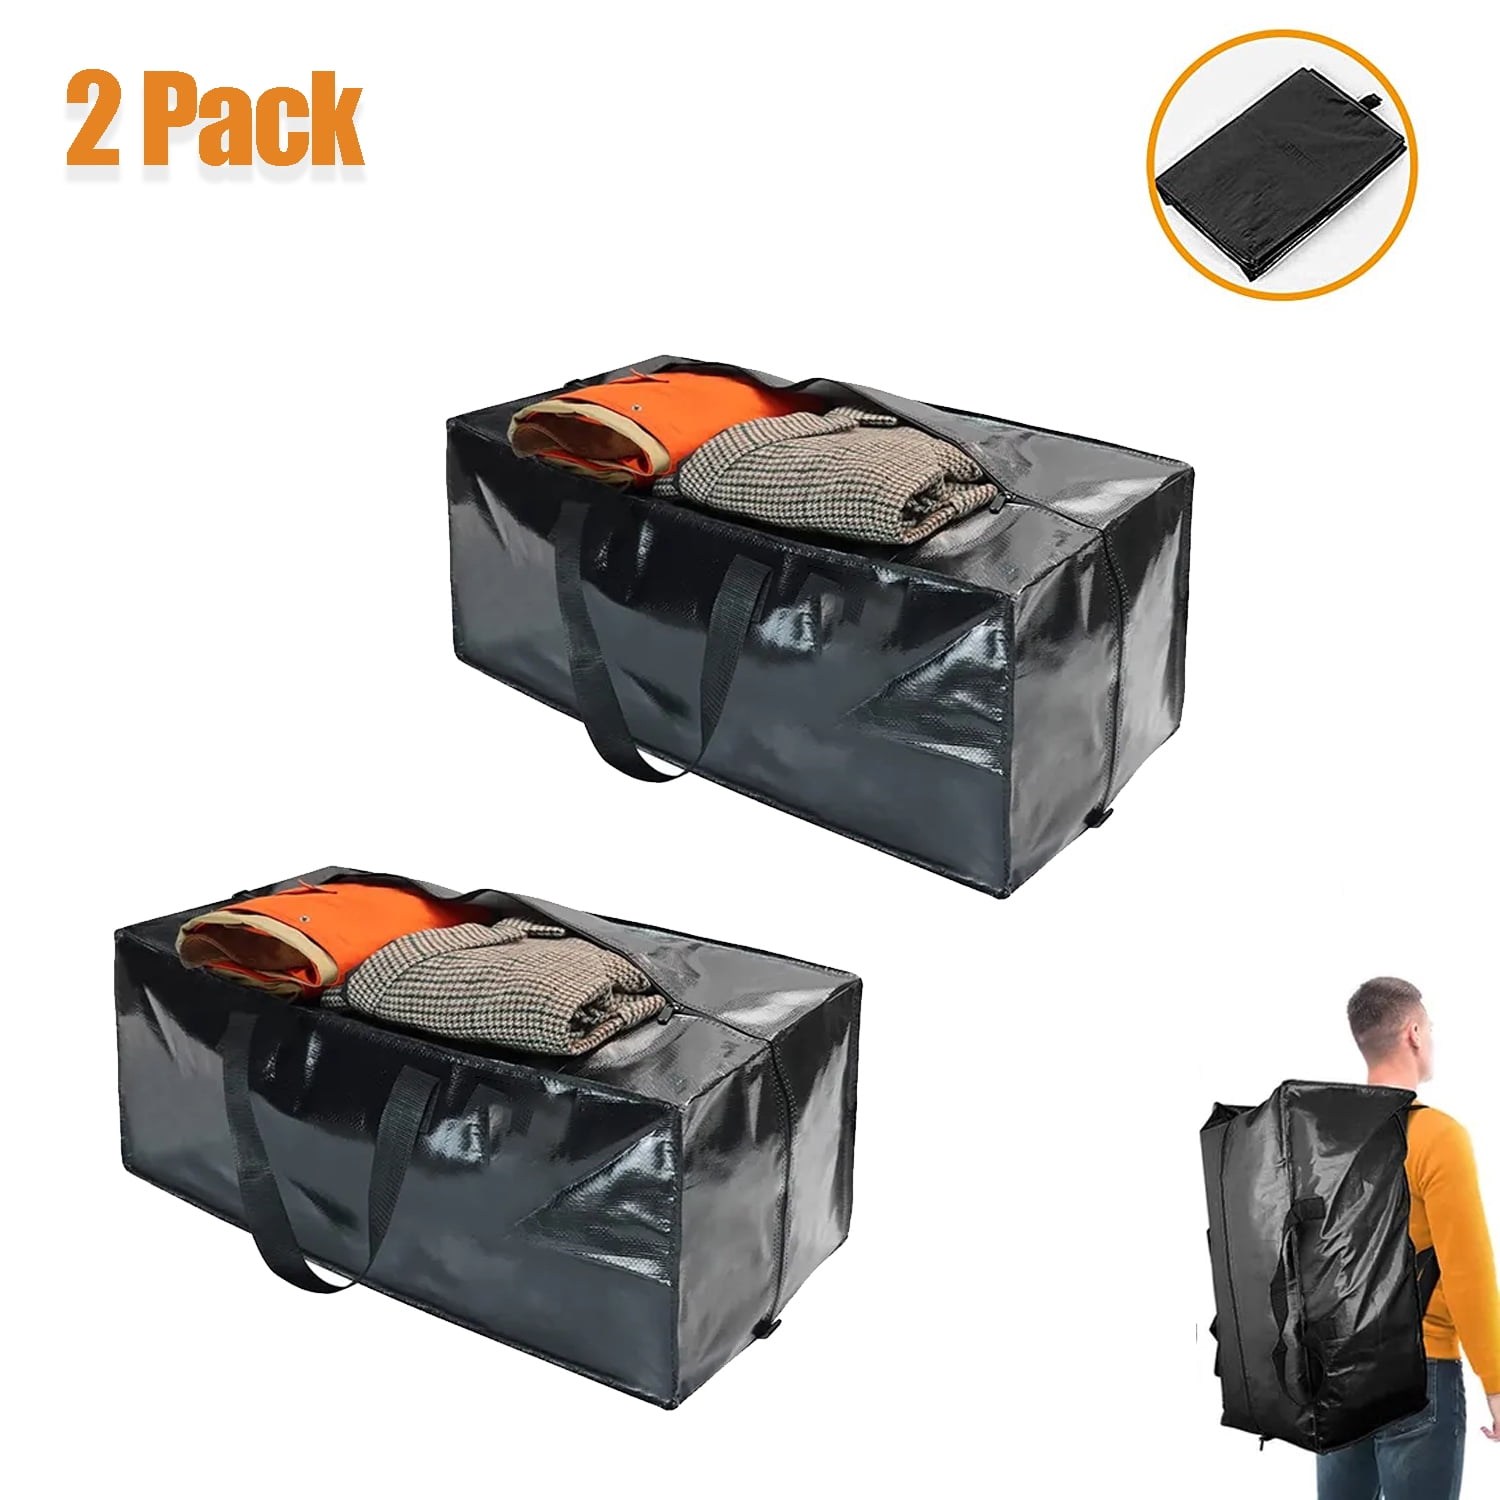 4 Combo Packs of Portable Storage Bag, 2 Large, 2 XL, 1 XXL, 5PC/Pack, Big  bags clothes and blanket storage bag for organization, storage, protection  – Ri Pac